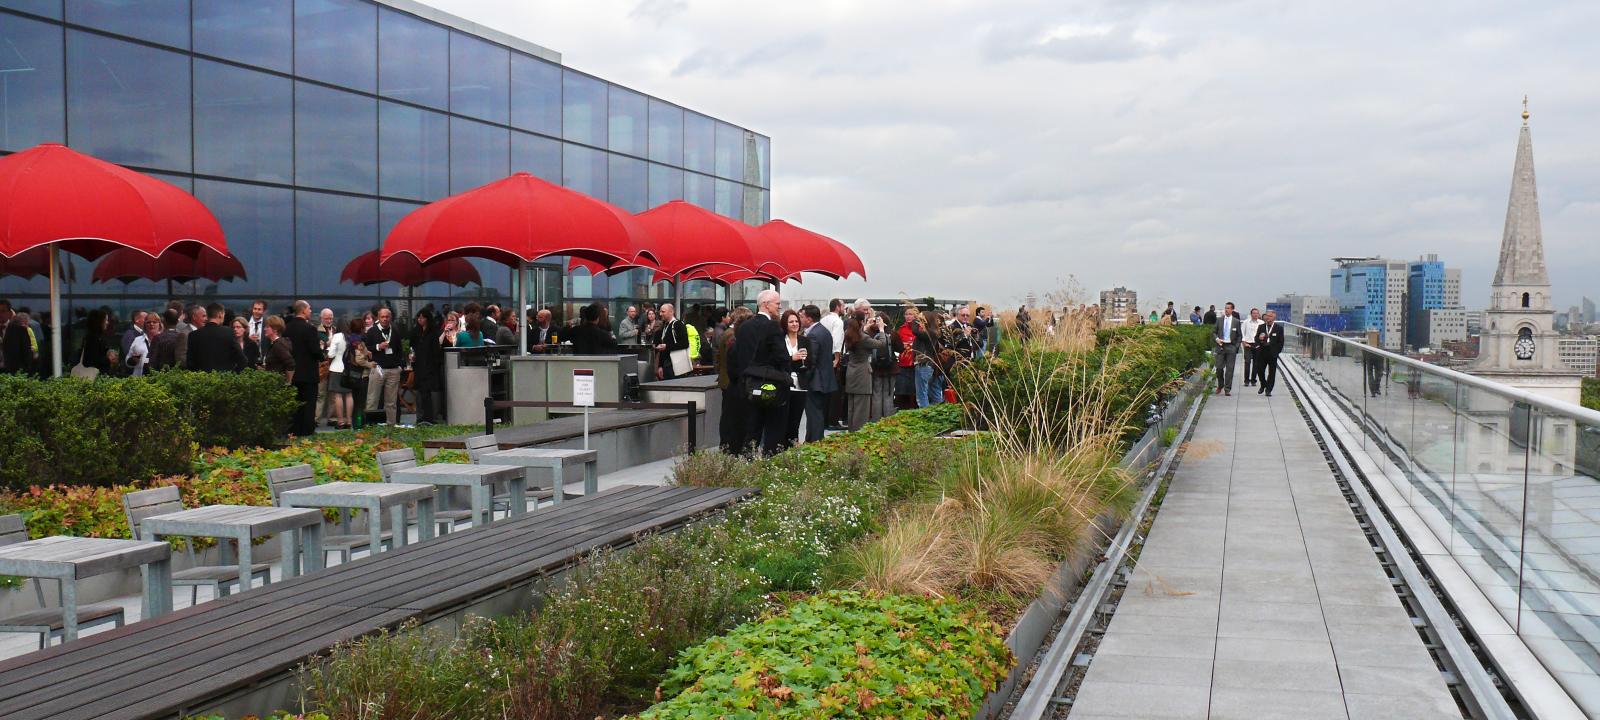 Event on a roof garden in the city